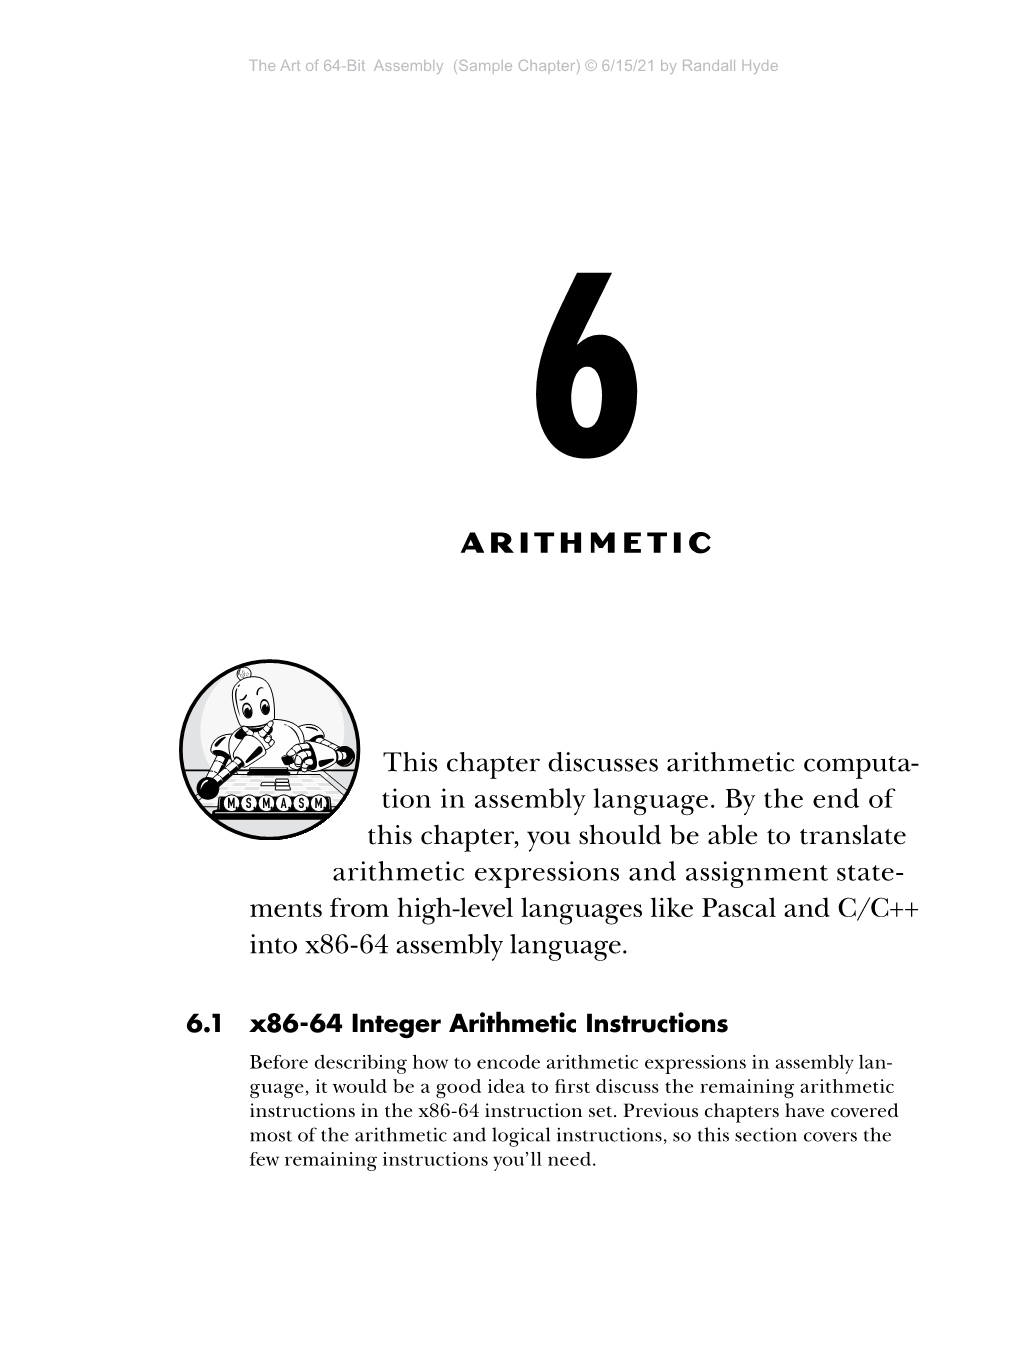 Download Chapter 6: ARITHMETIC